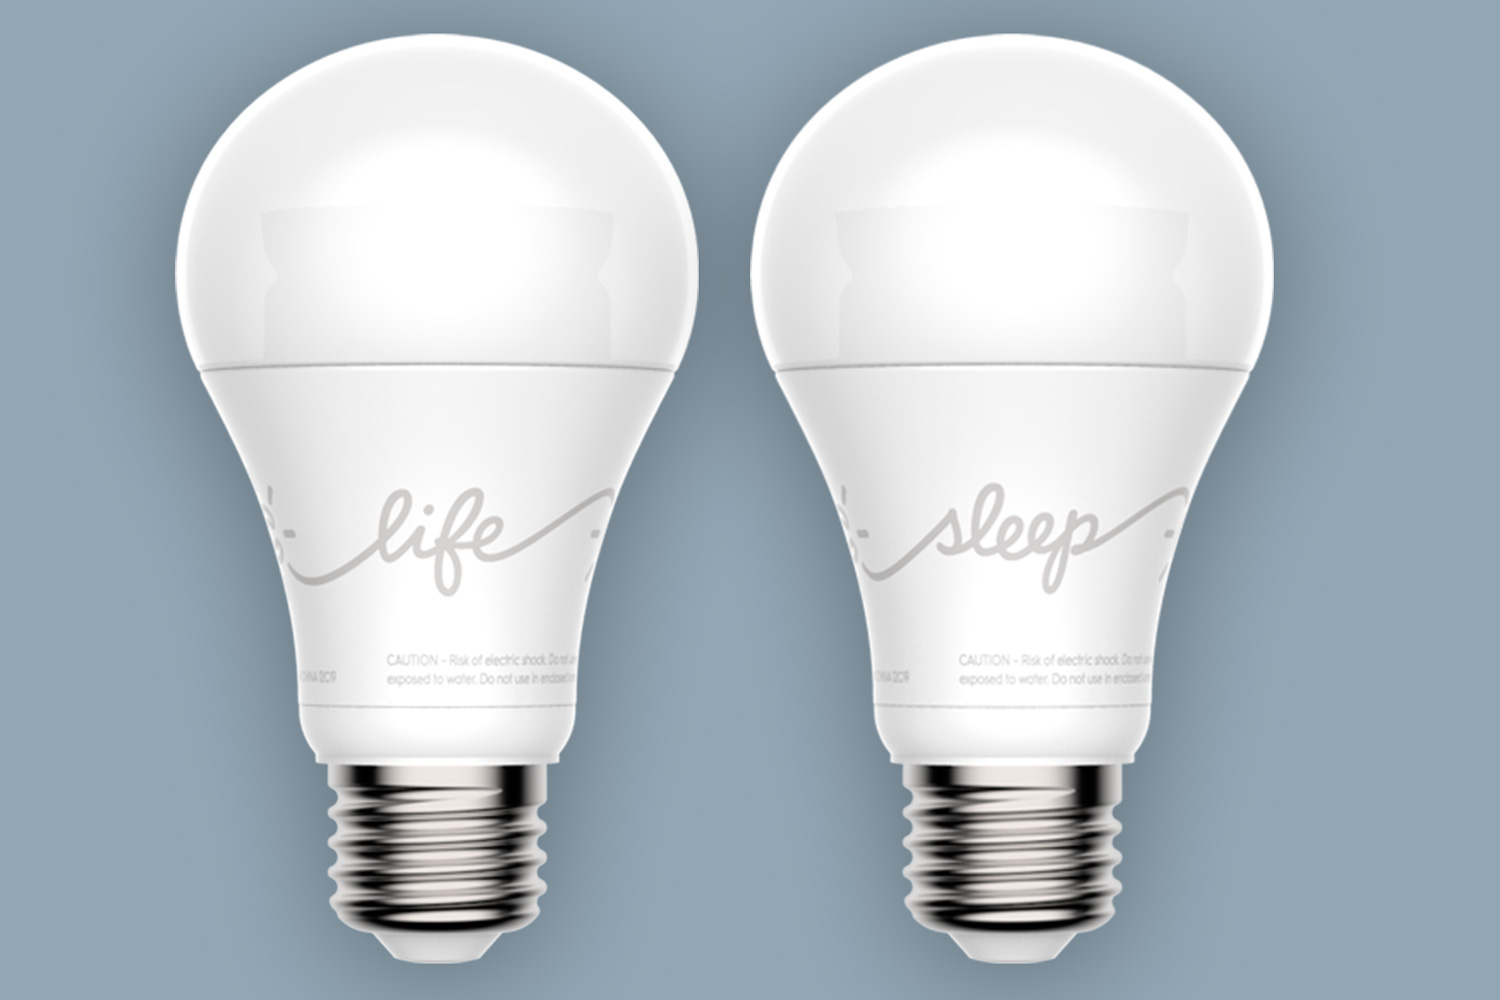 Better Bulbs C Ge Light Bulbs 11 Products To Help within dimensions 1500 X 1000